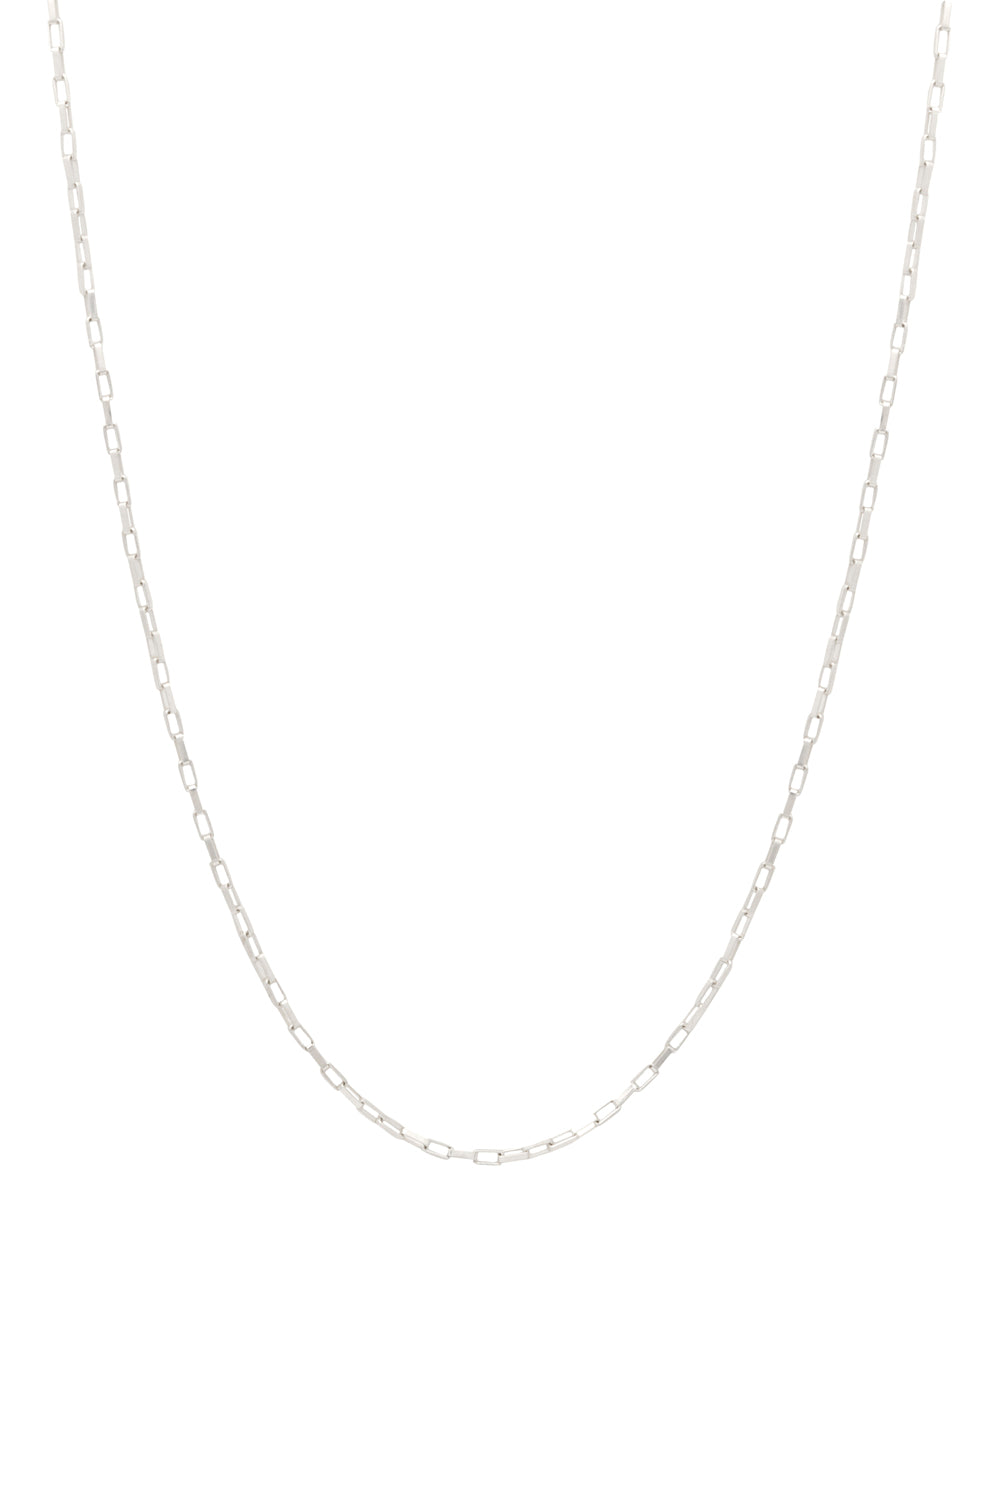 Silver Chain Necklace - Tea & Tequila